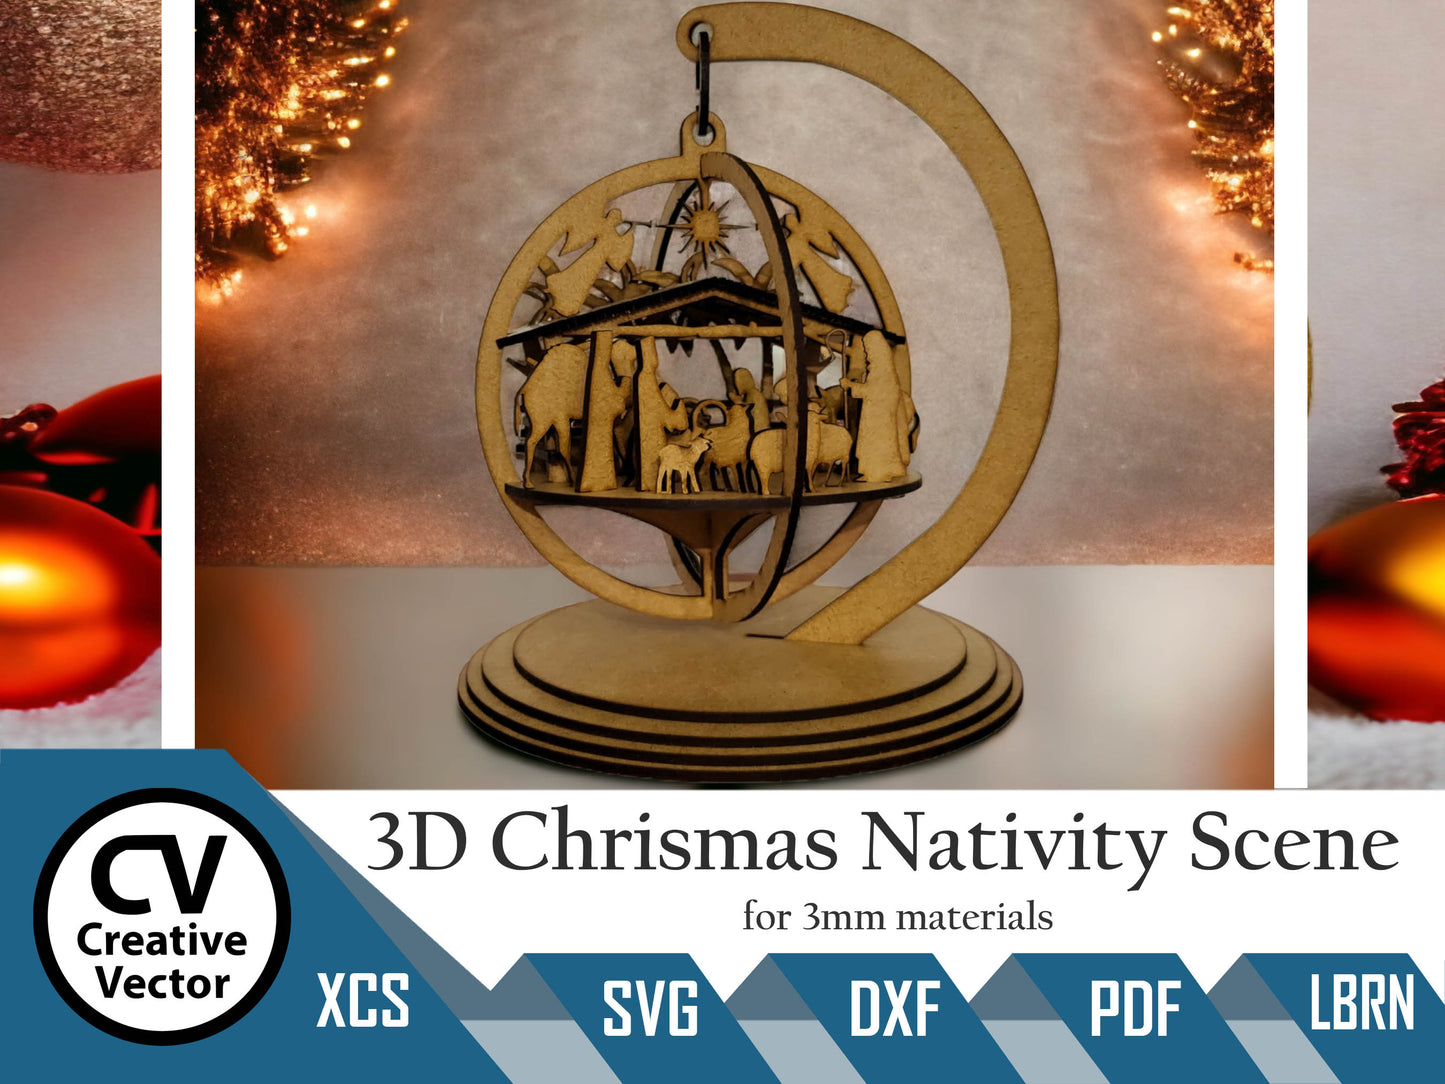 3D Christmas Nativity Scene with a standing bauble